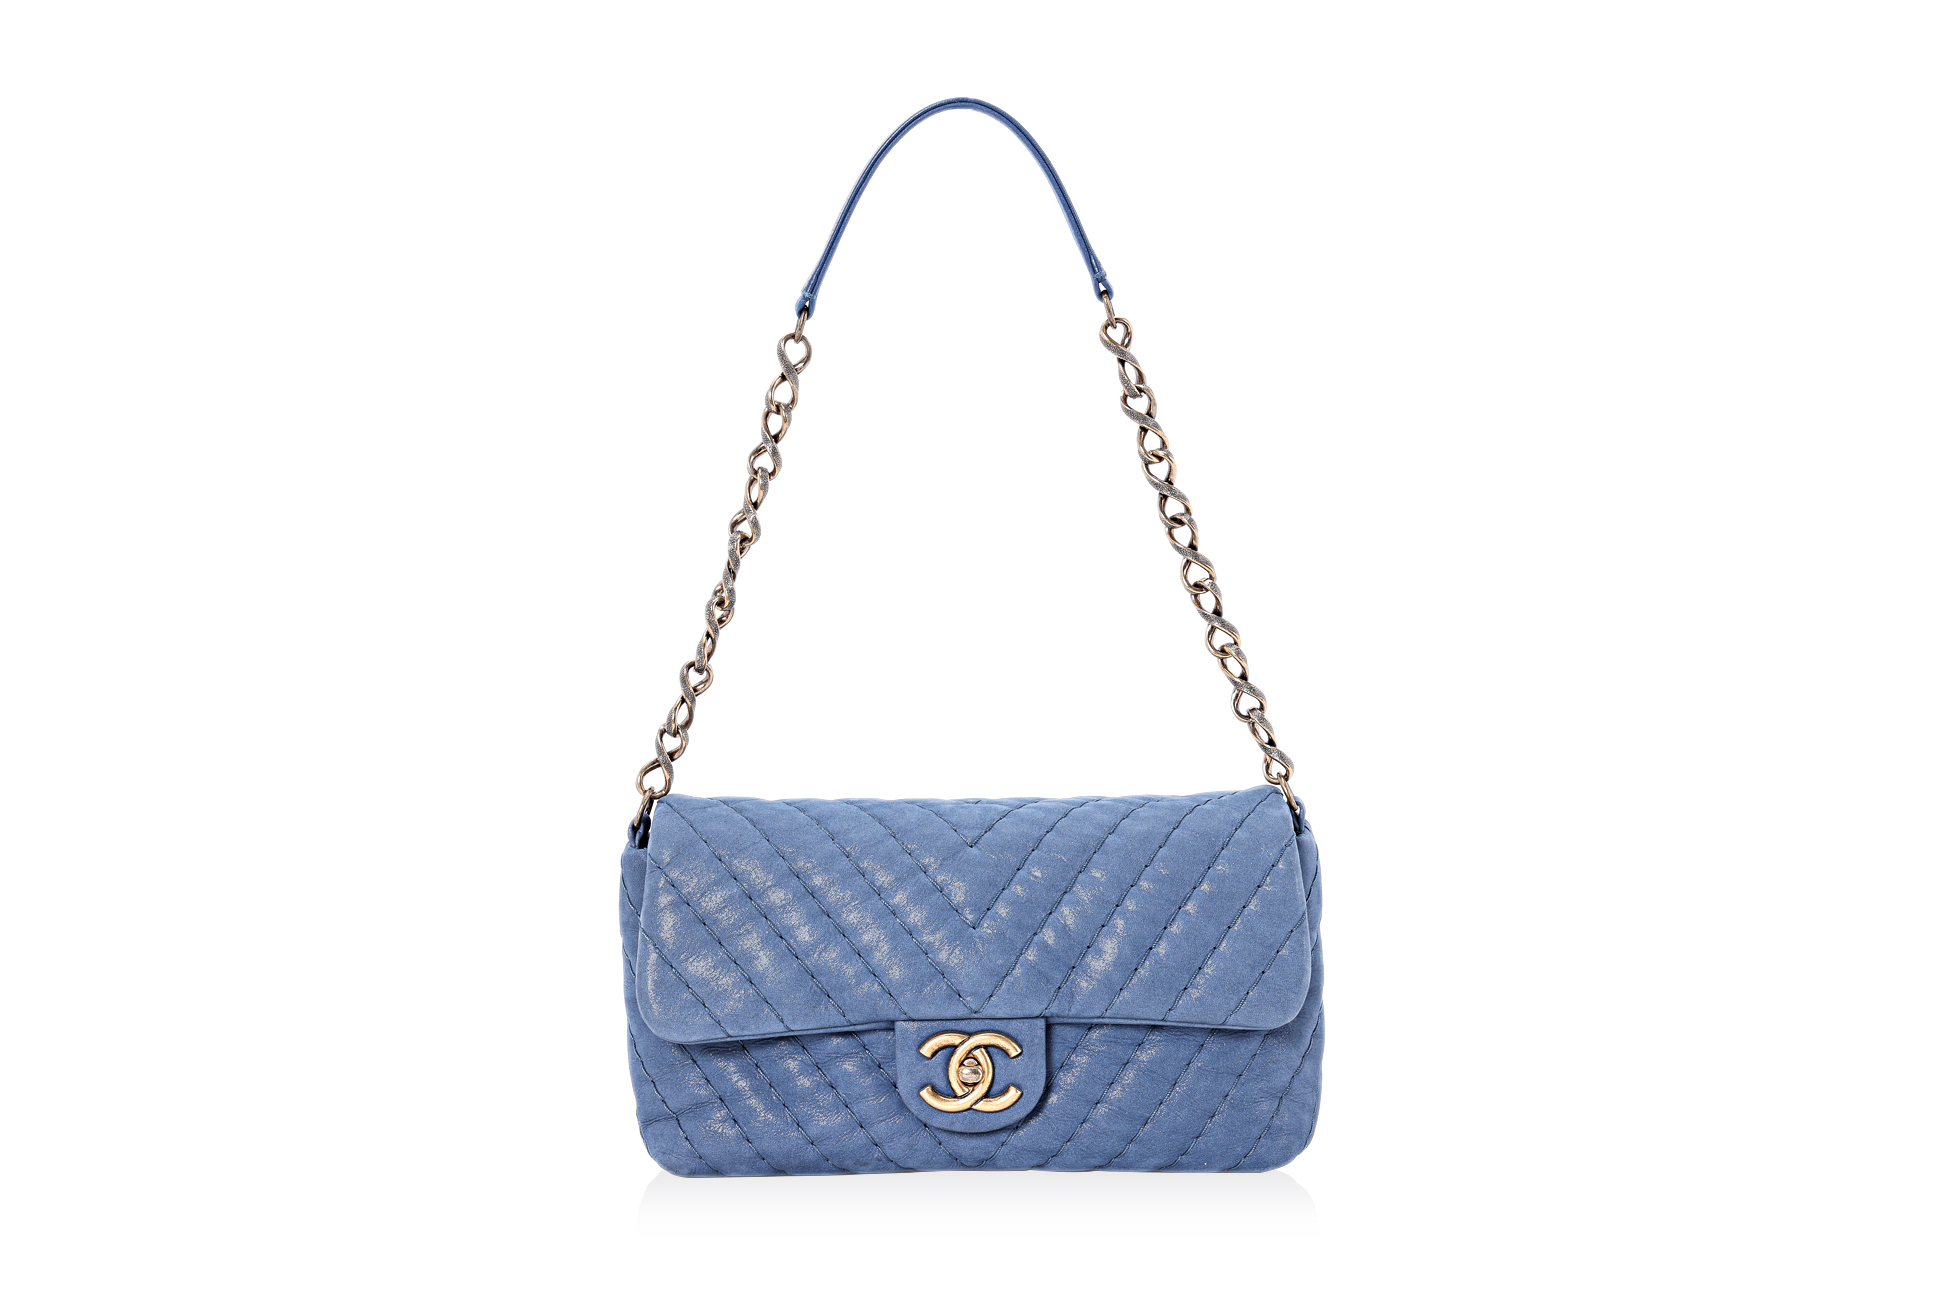 A CHANEL BLUE CHEVRON QUILTED FLAP BAG - Image 3 of 9